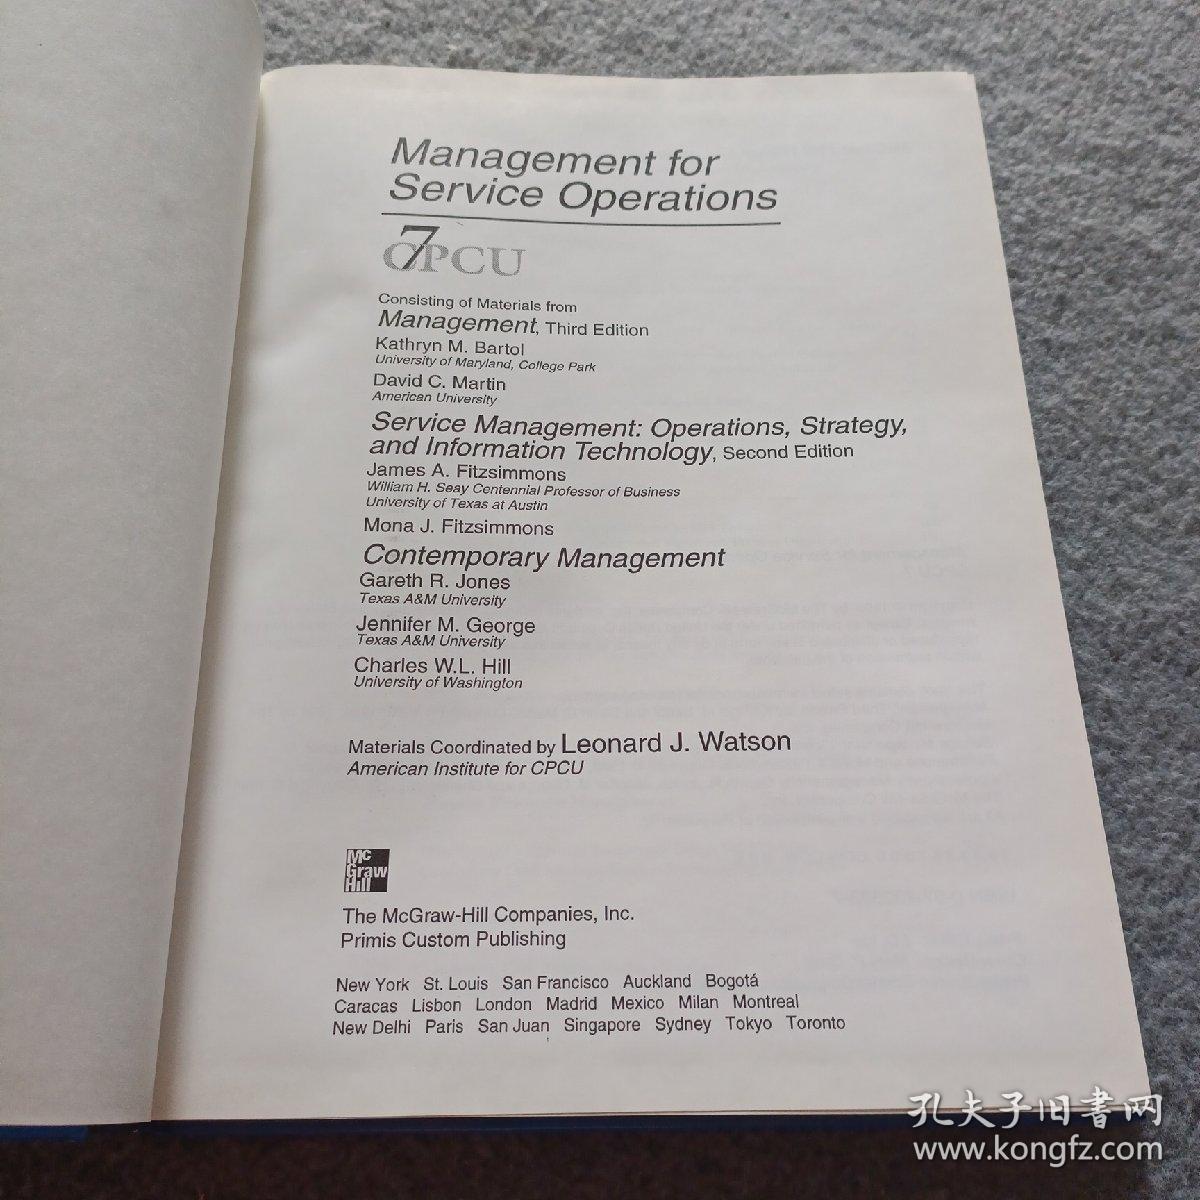 Management for Service Operations First Edition